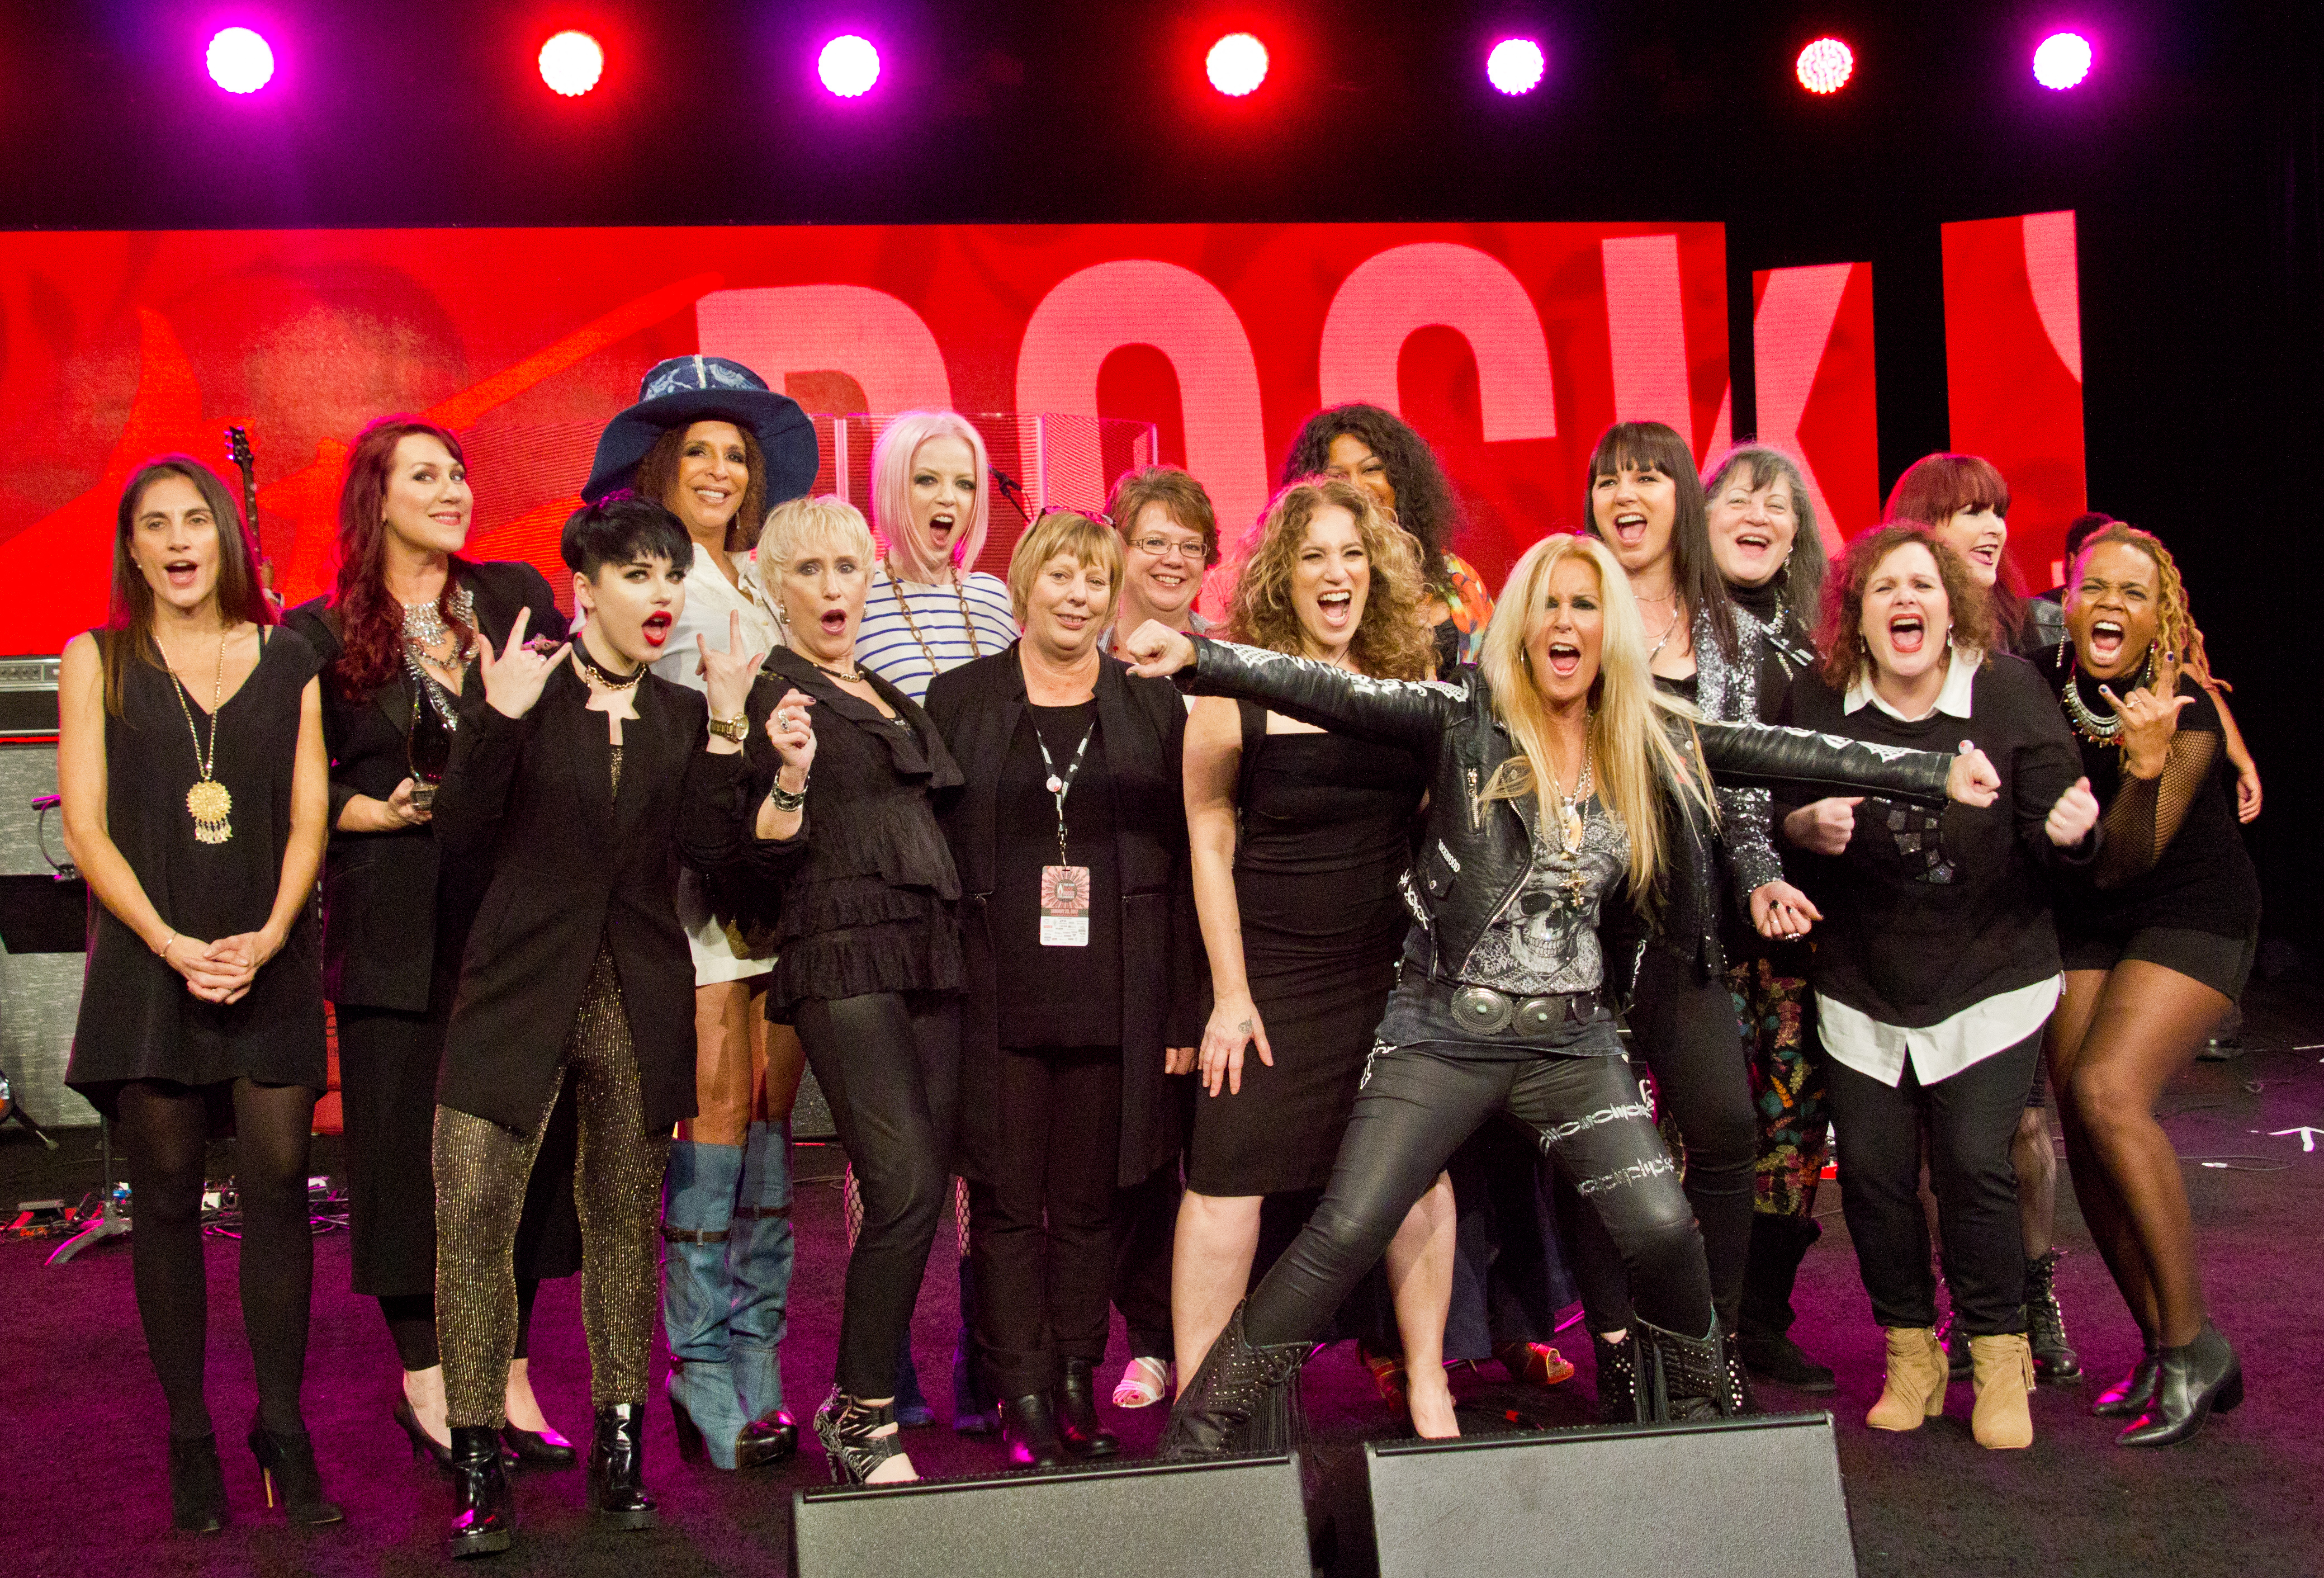 Organizers, presenters and honorees took to the She Rocks Awards stage for an electrifying ‘girl power’ moment.